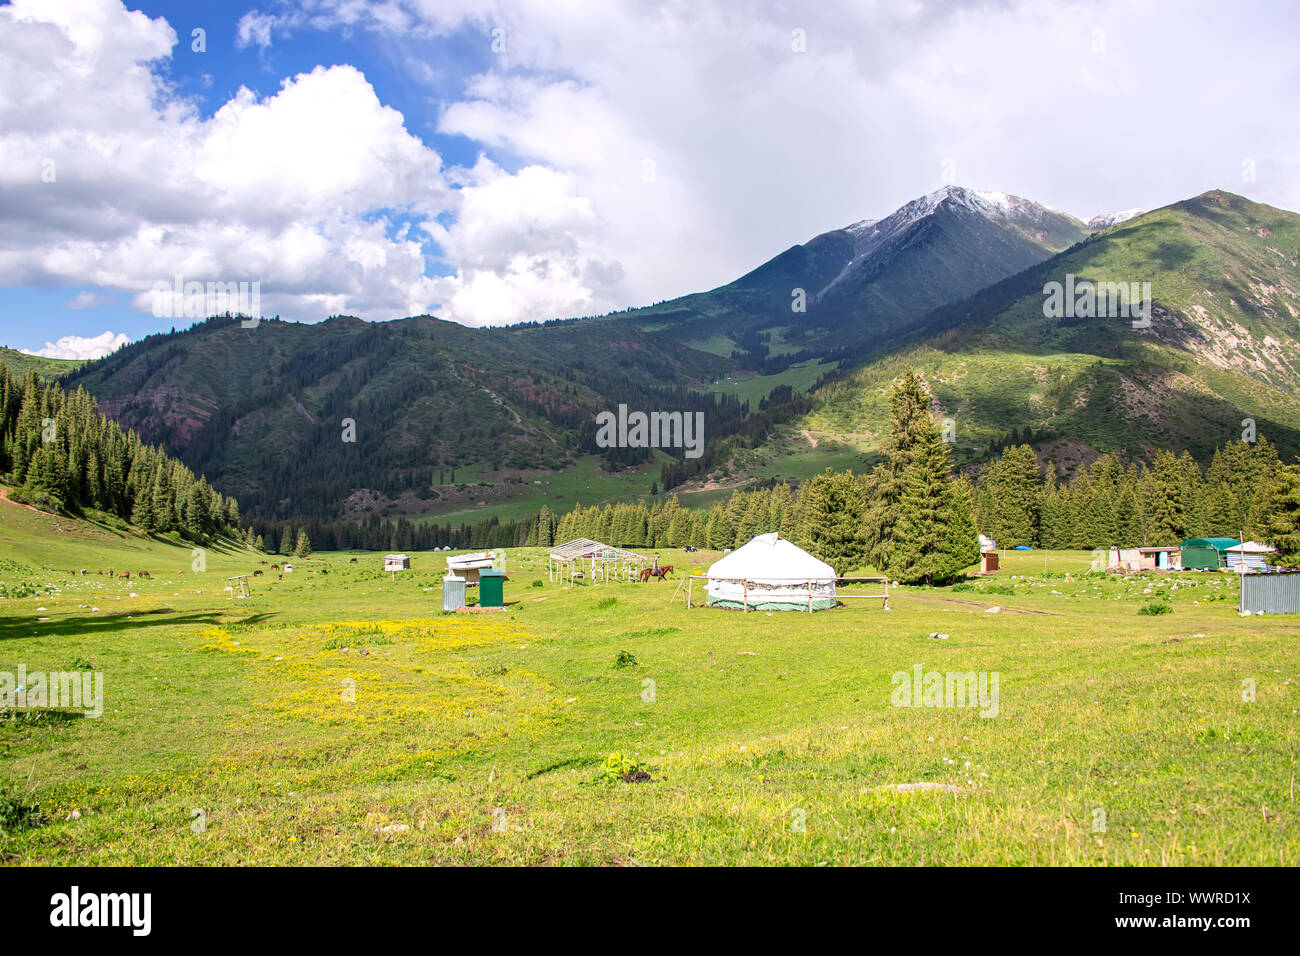 Kyrgyz nomad village on jailoo against a mountain range with snowy peaks and cloudy sky. Kyrgyzstan Stock Photo